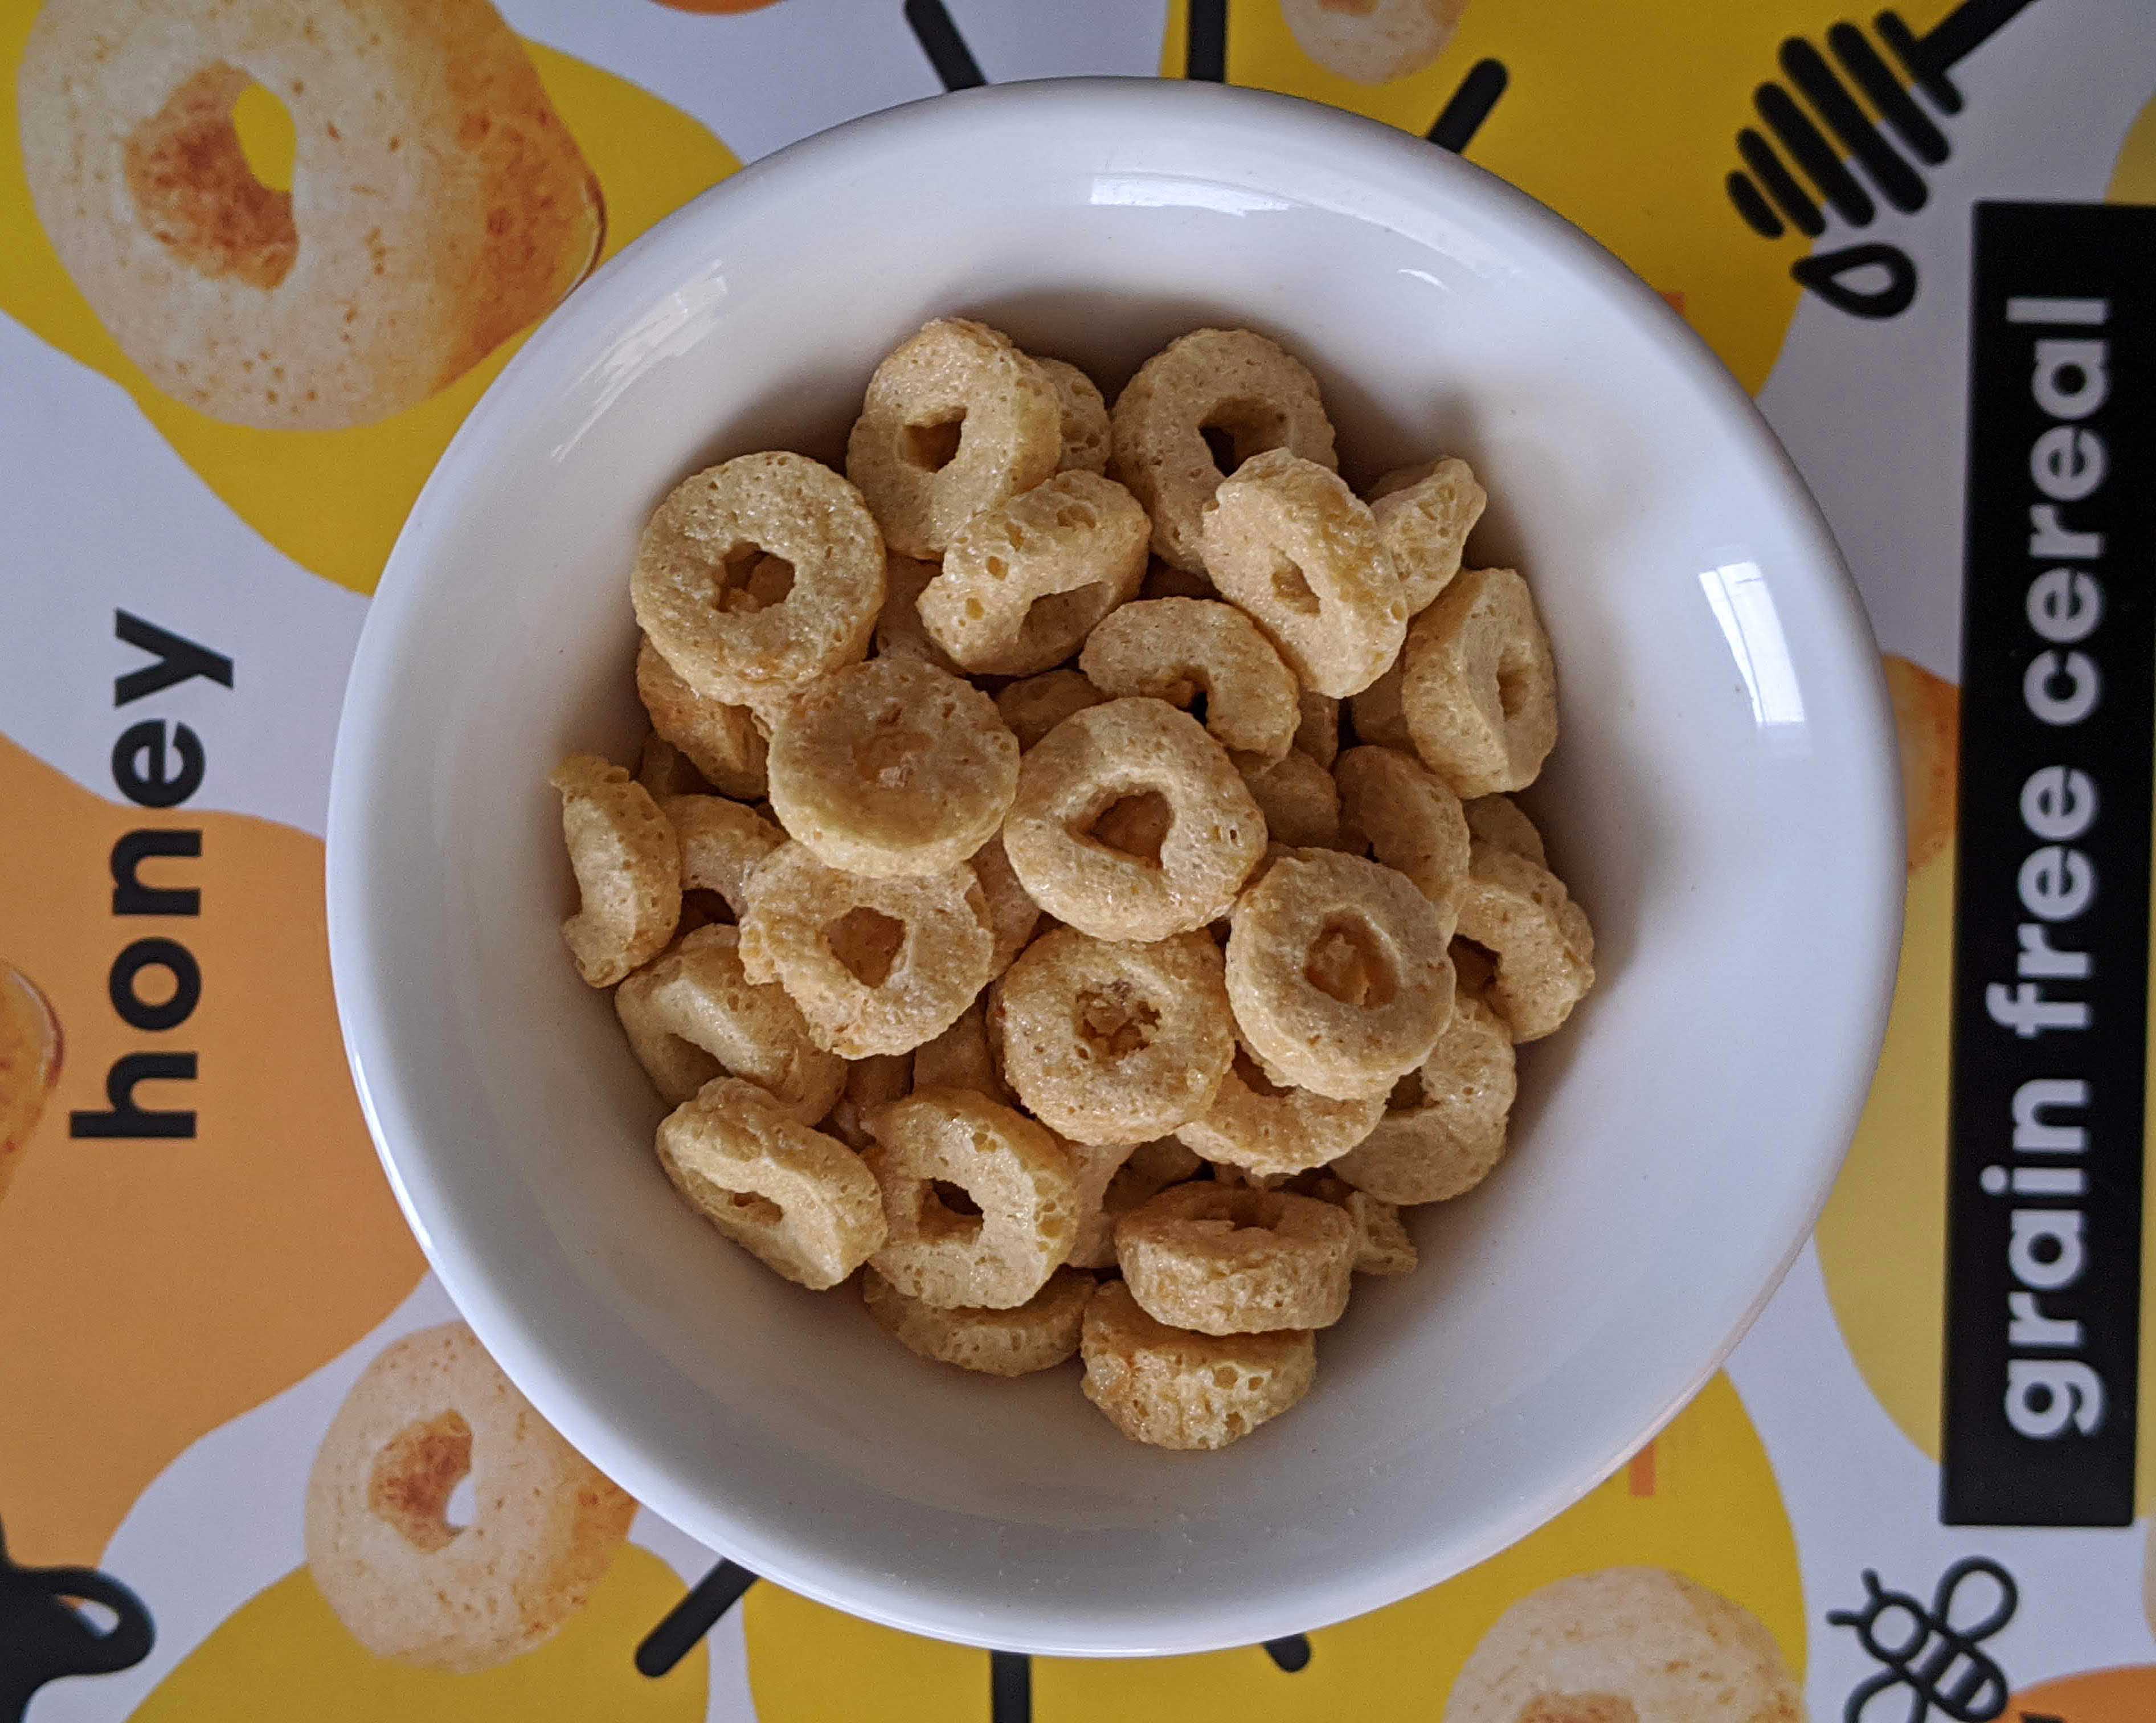 Three Wishes Grain Free Cereal